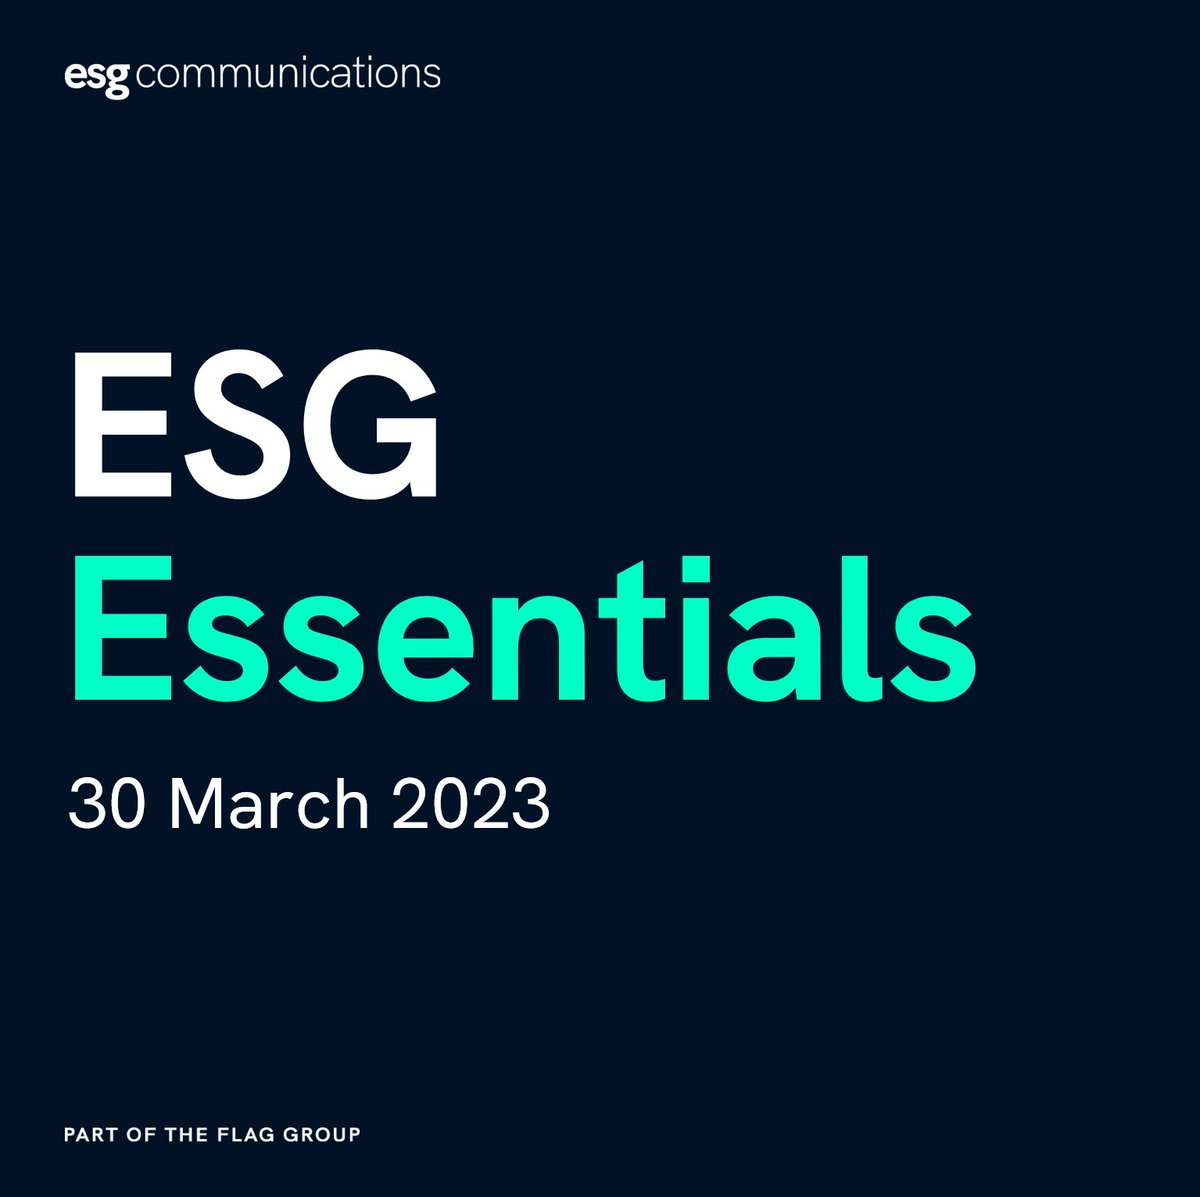 This week, Bloomberg reported that MSCI is seeking to dramatically revise their ESG ratings- bringing the number of companies with a 'AAA' rating from 1,120 to just 52. Read about this in the newest edition of ESG essentials, available here: esgcommunications.com/our-thoughts/e…